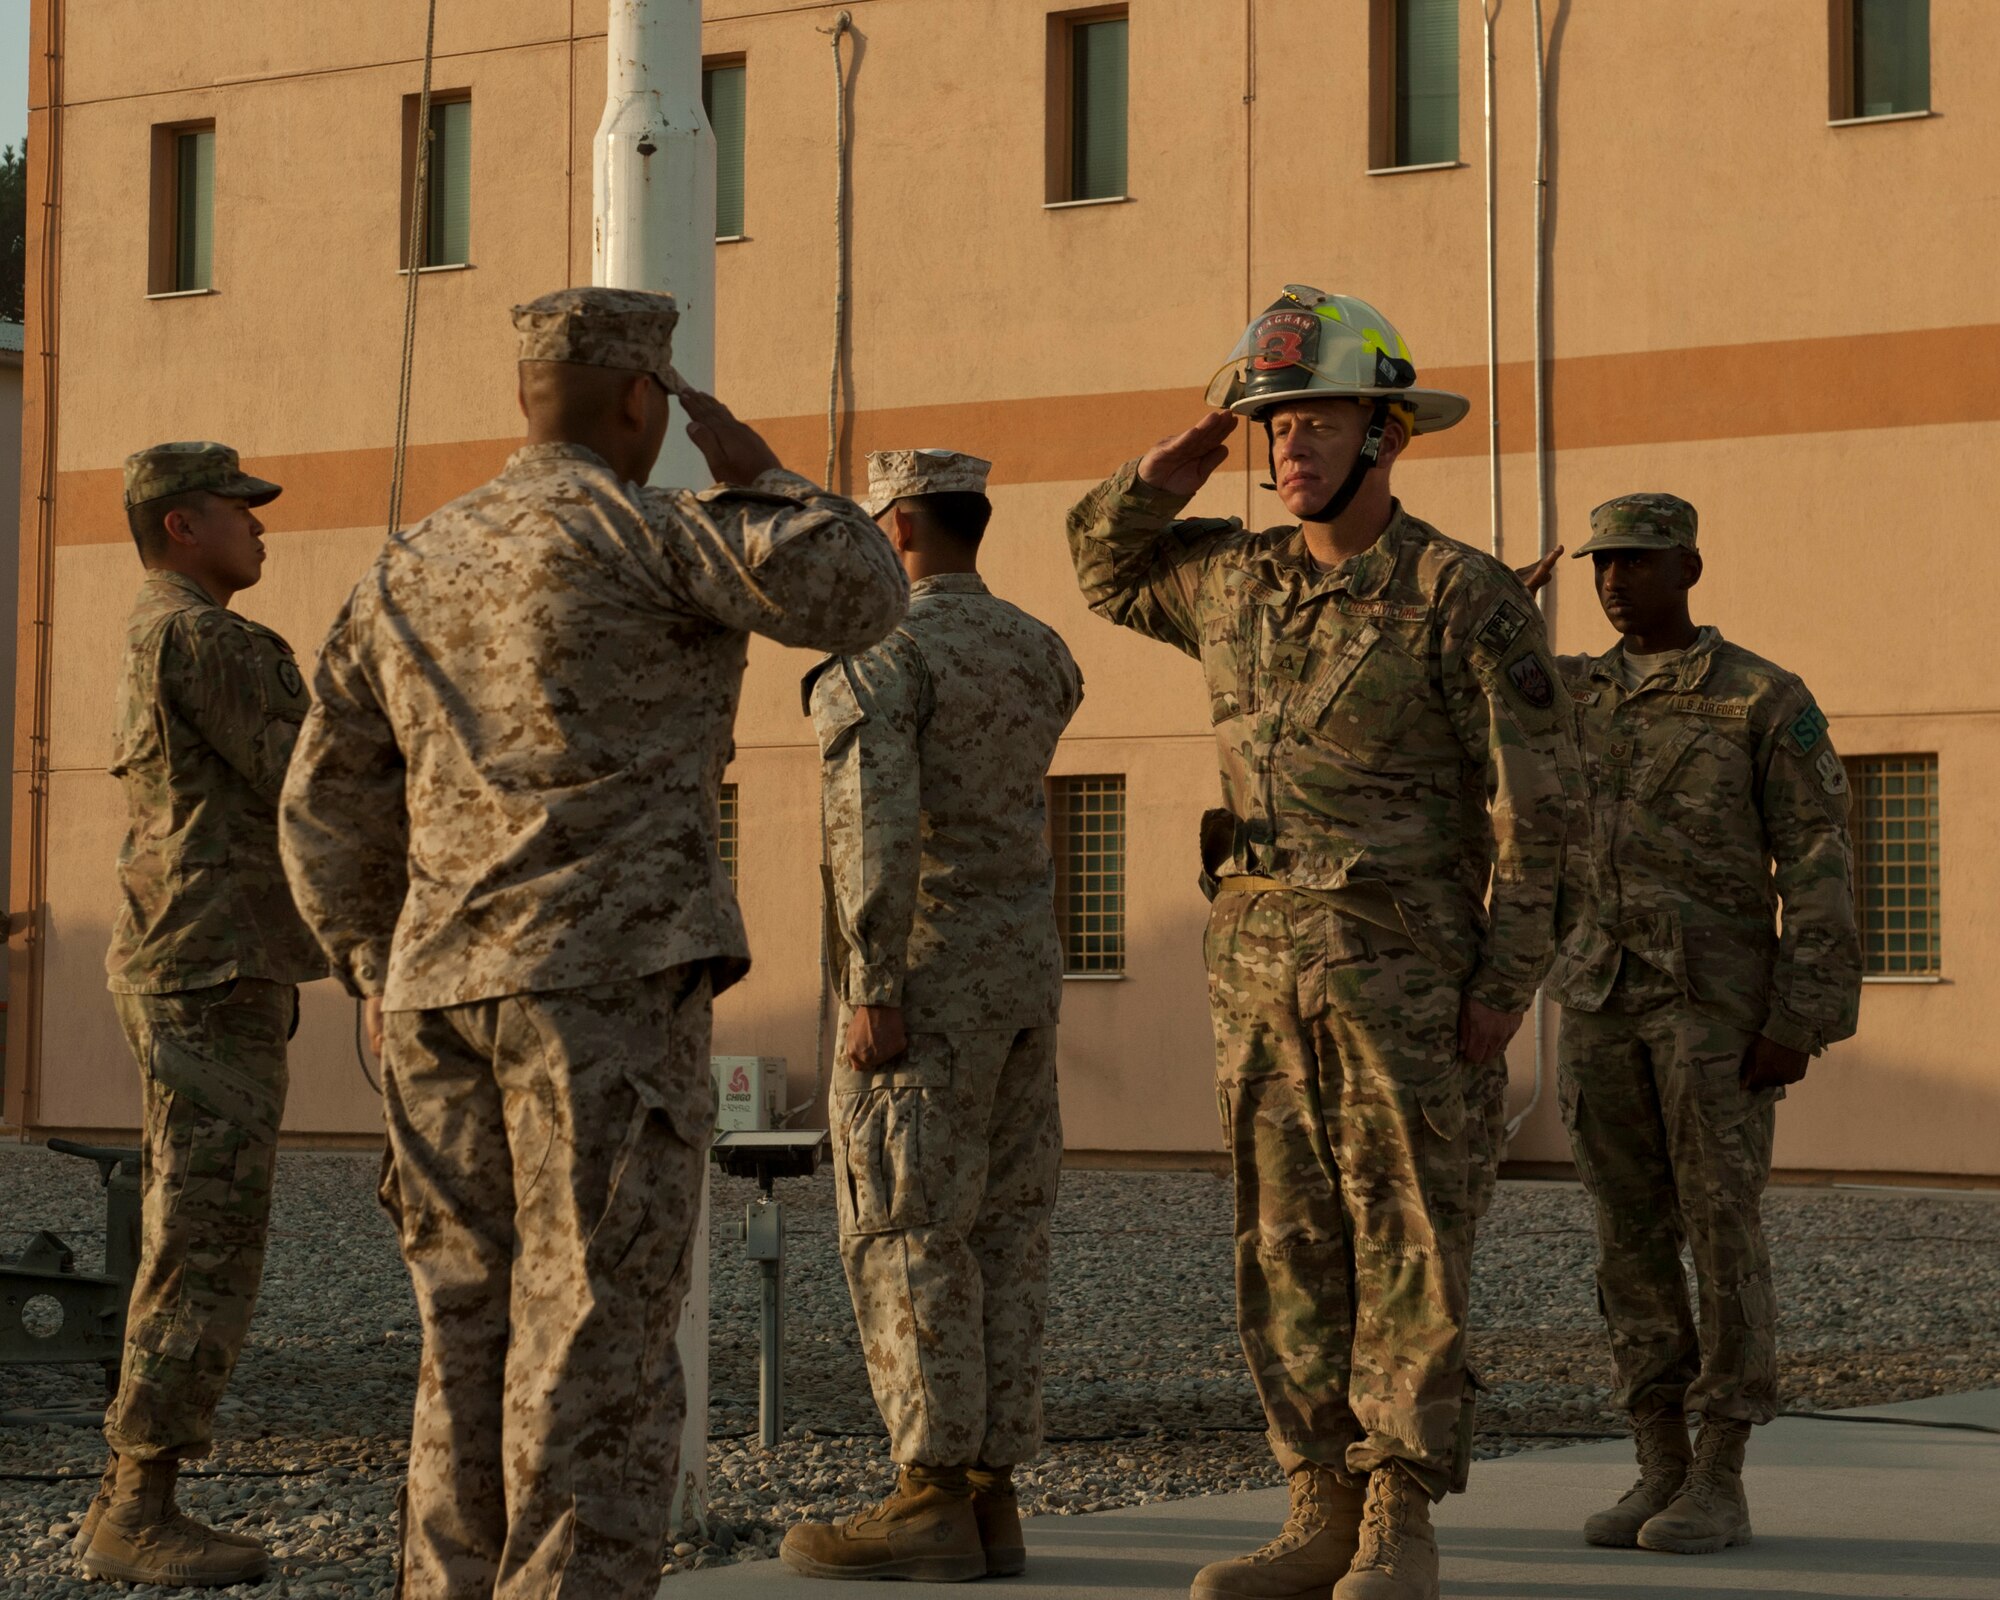 A joint service honor guard salutes the flag during a retreat ceremony, Bagram Airfield, Afghanistan, Sept. 11, 2016. The retreat ceremony was part of a 9/11 remembrance ceremony held at Bagram to remember those who gave their lives 15 years ago. (U.S. Air Force photo by Capt. Korey Fratini